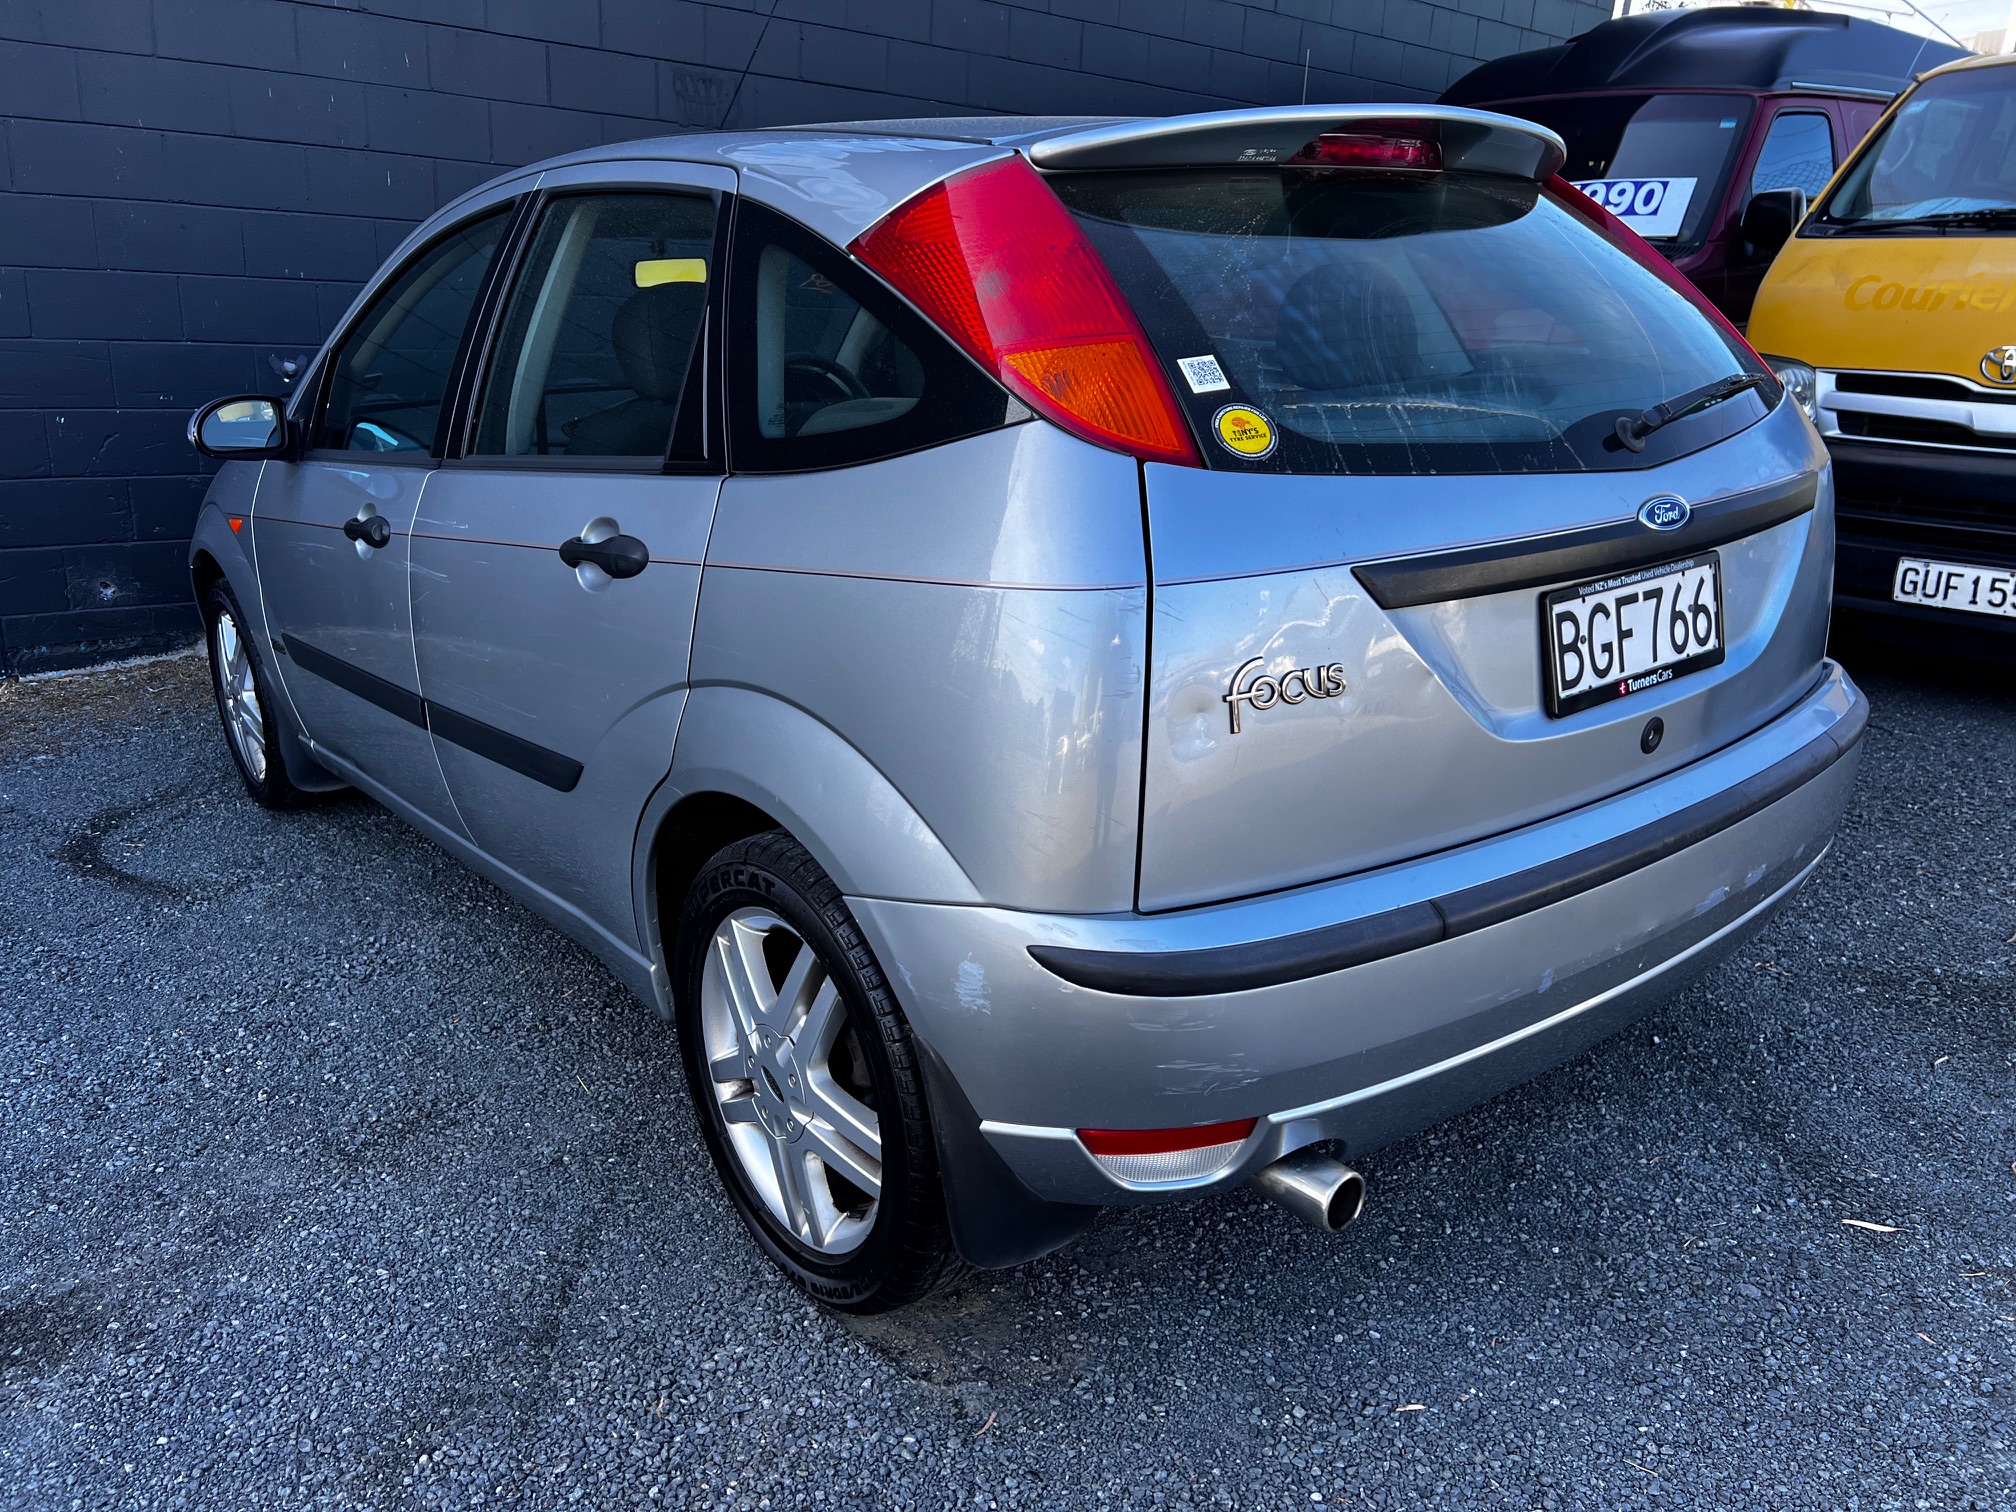 Ford Focus 2003 Image 6